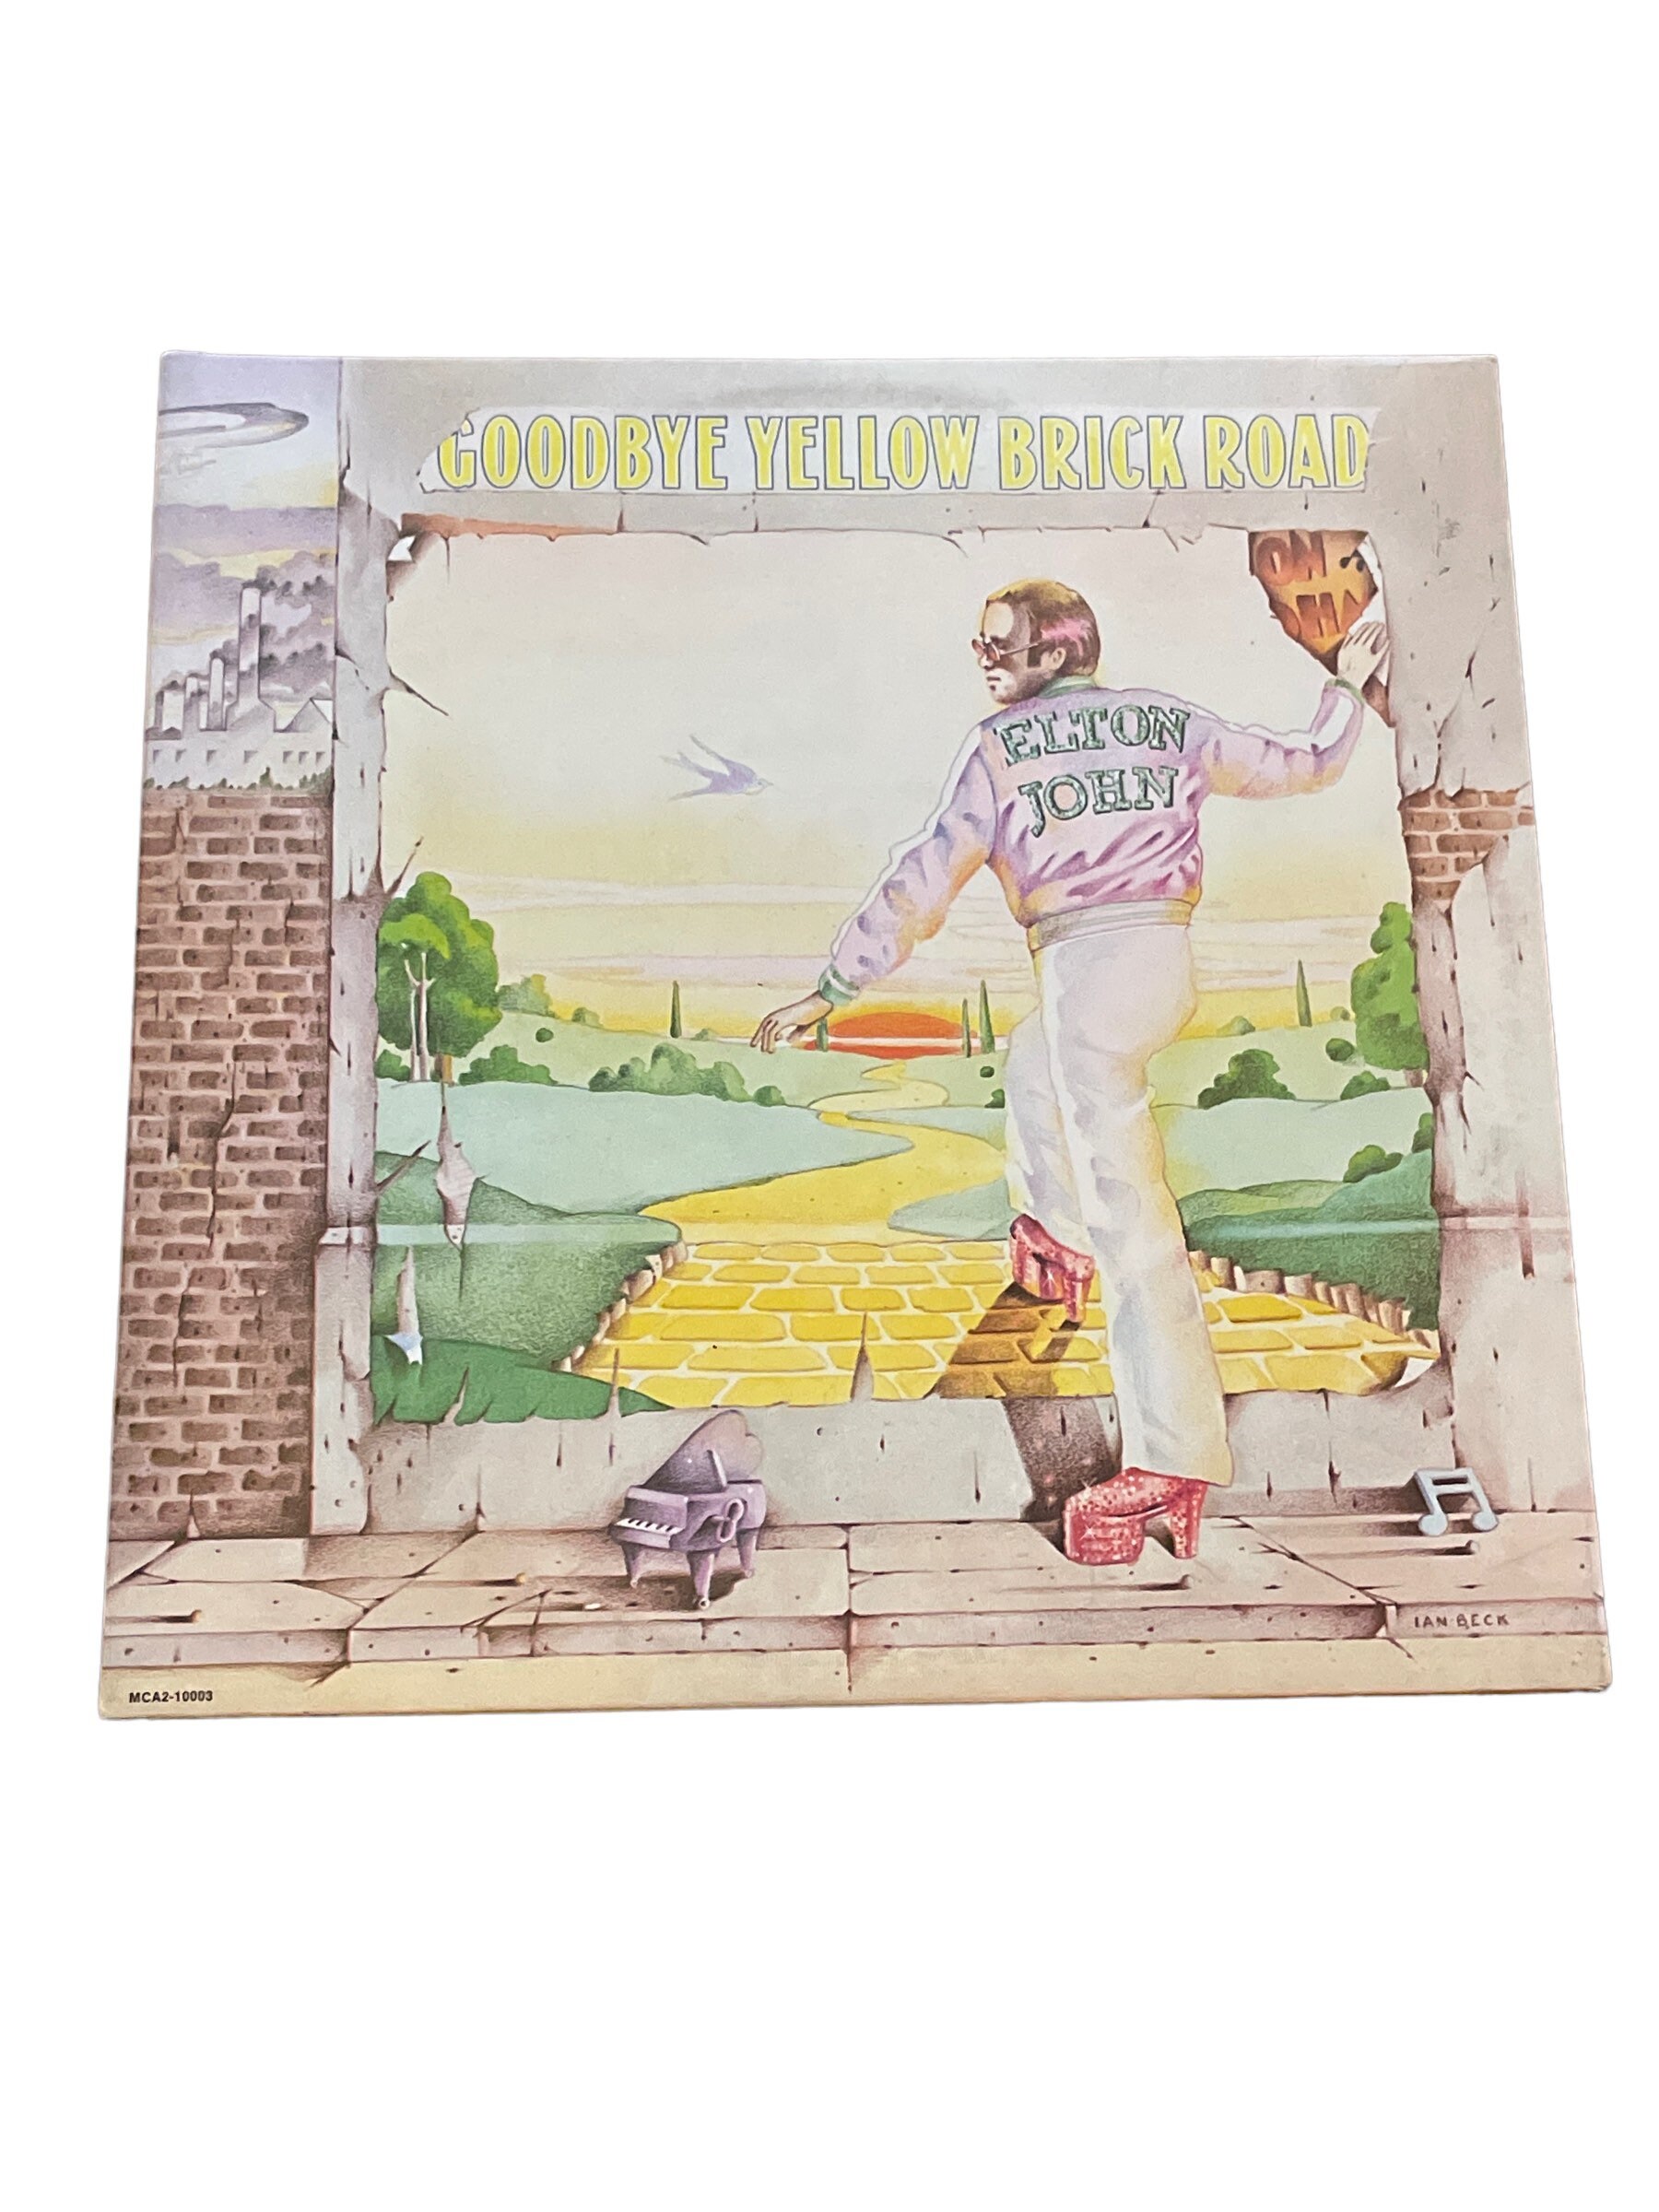 The Story of 'Goodbye Yellow Brick Road' by Elton John - Smooth